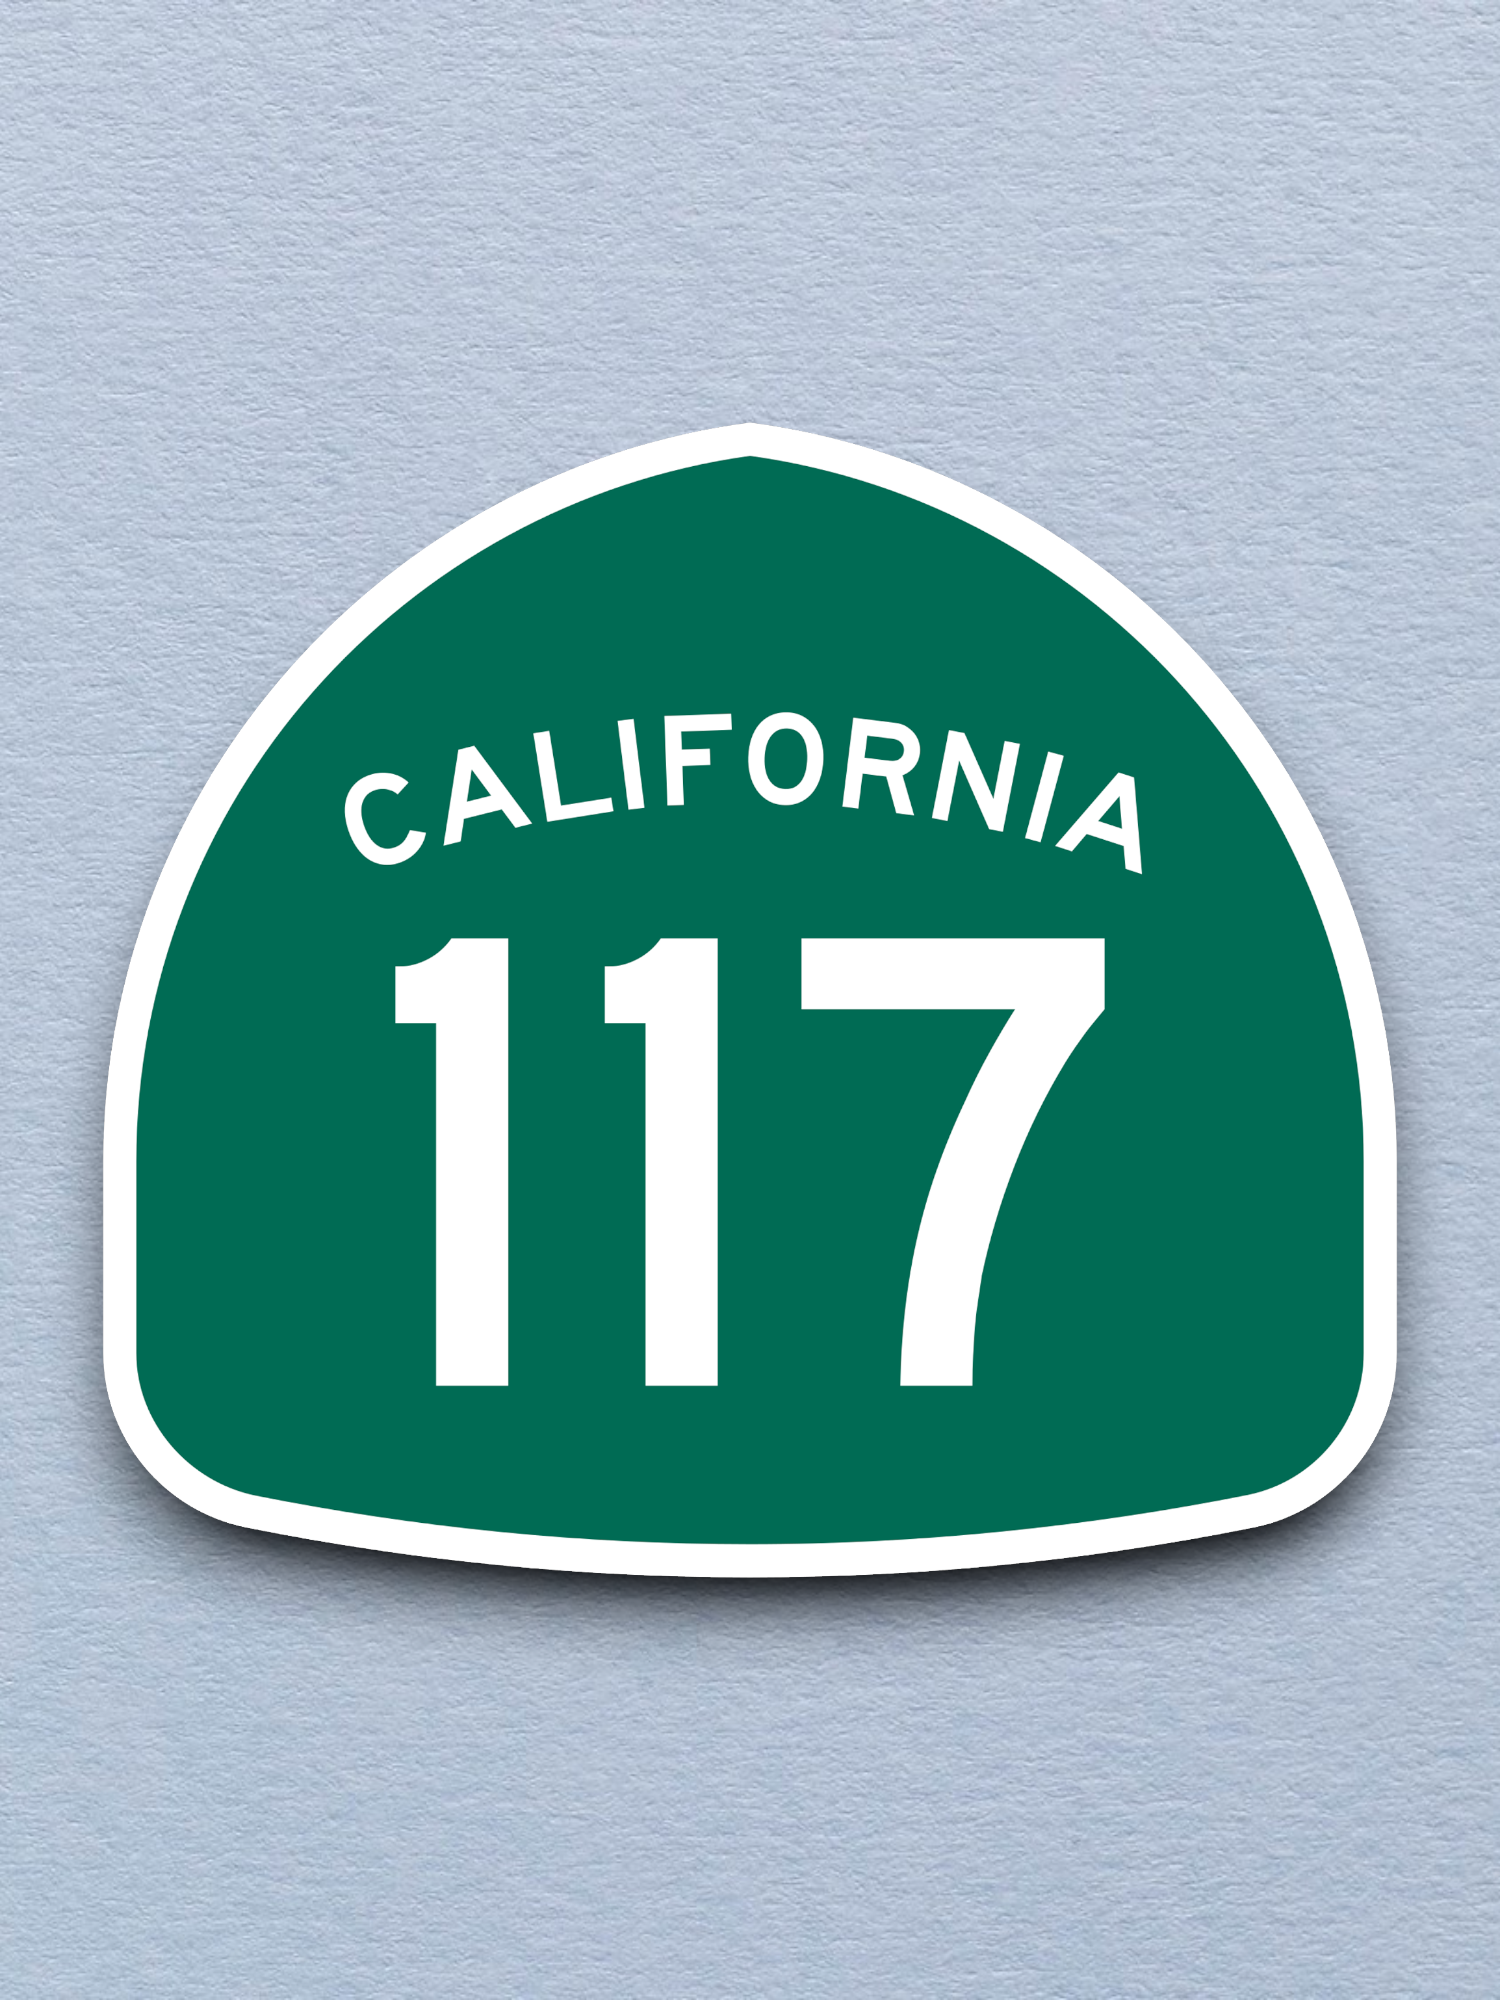 California State Route 117 Road Sign Sticker